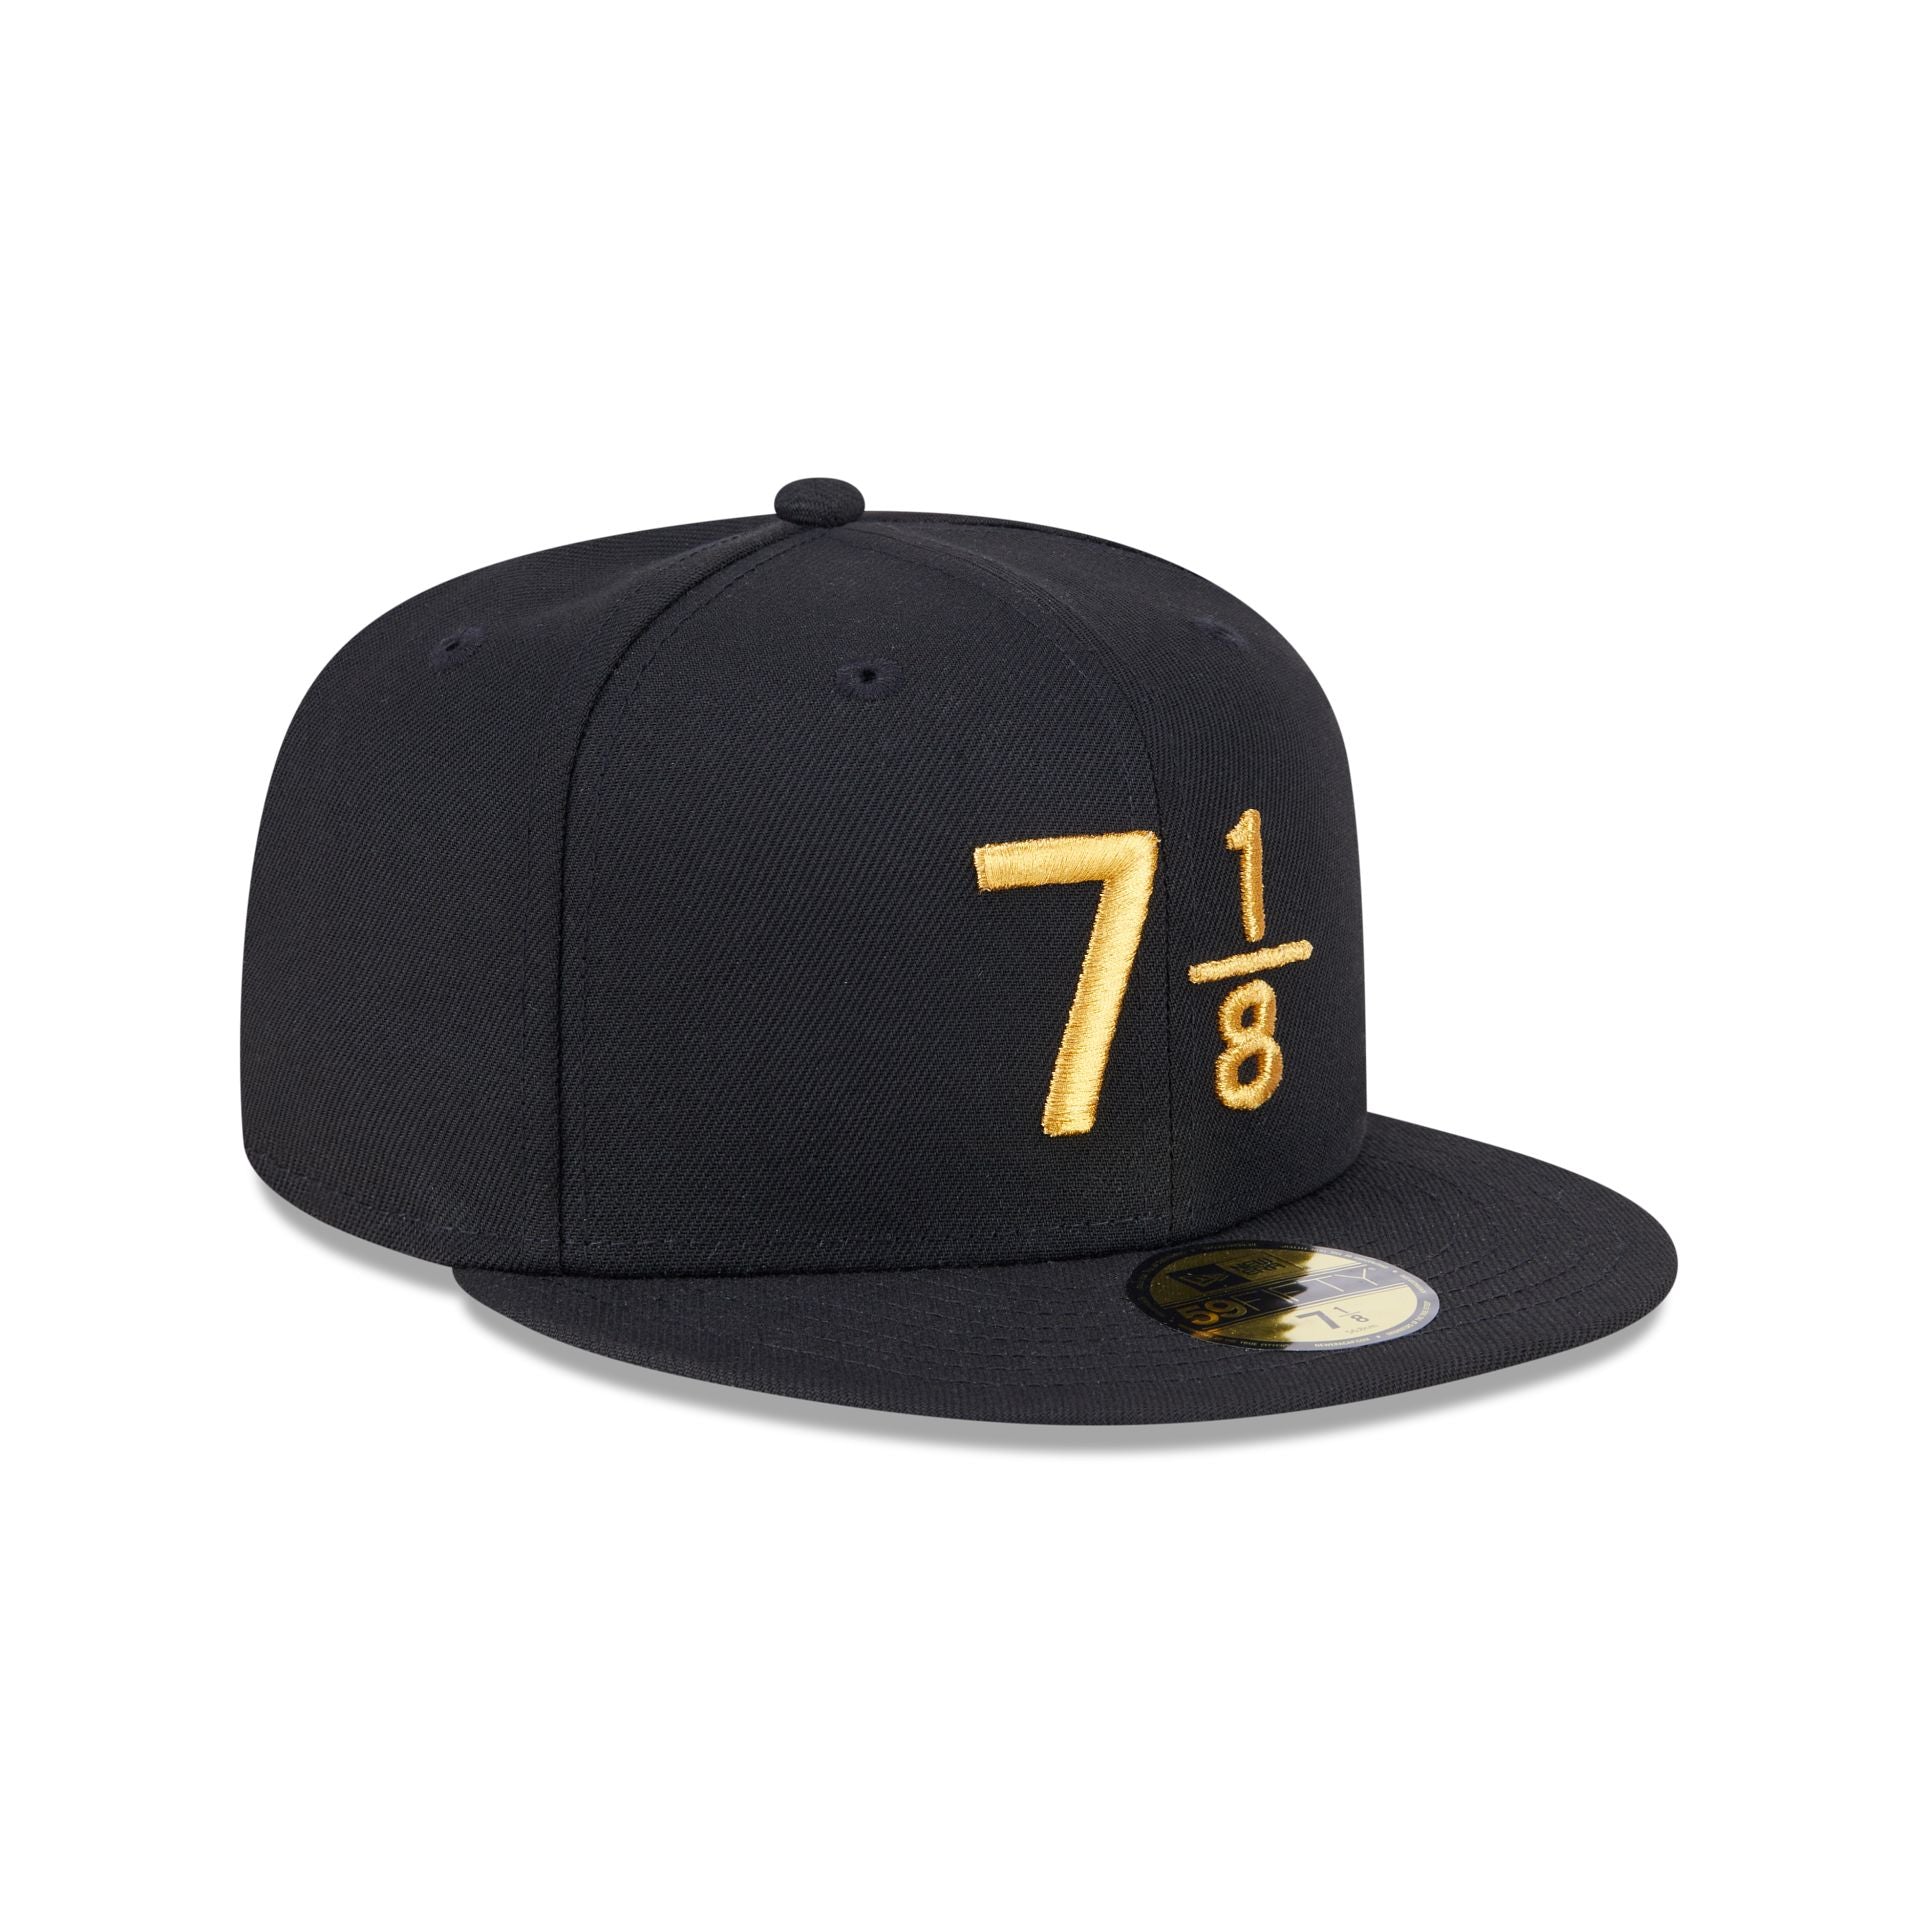 New Era Cap Signature Size 7 1/8 Black 59FIFTY Fitted